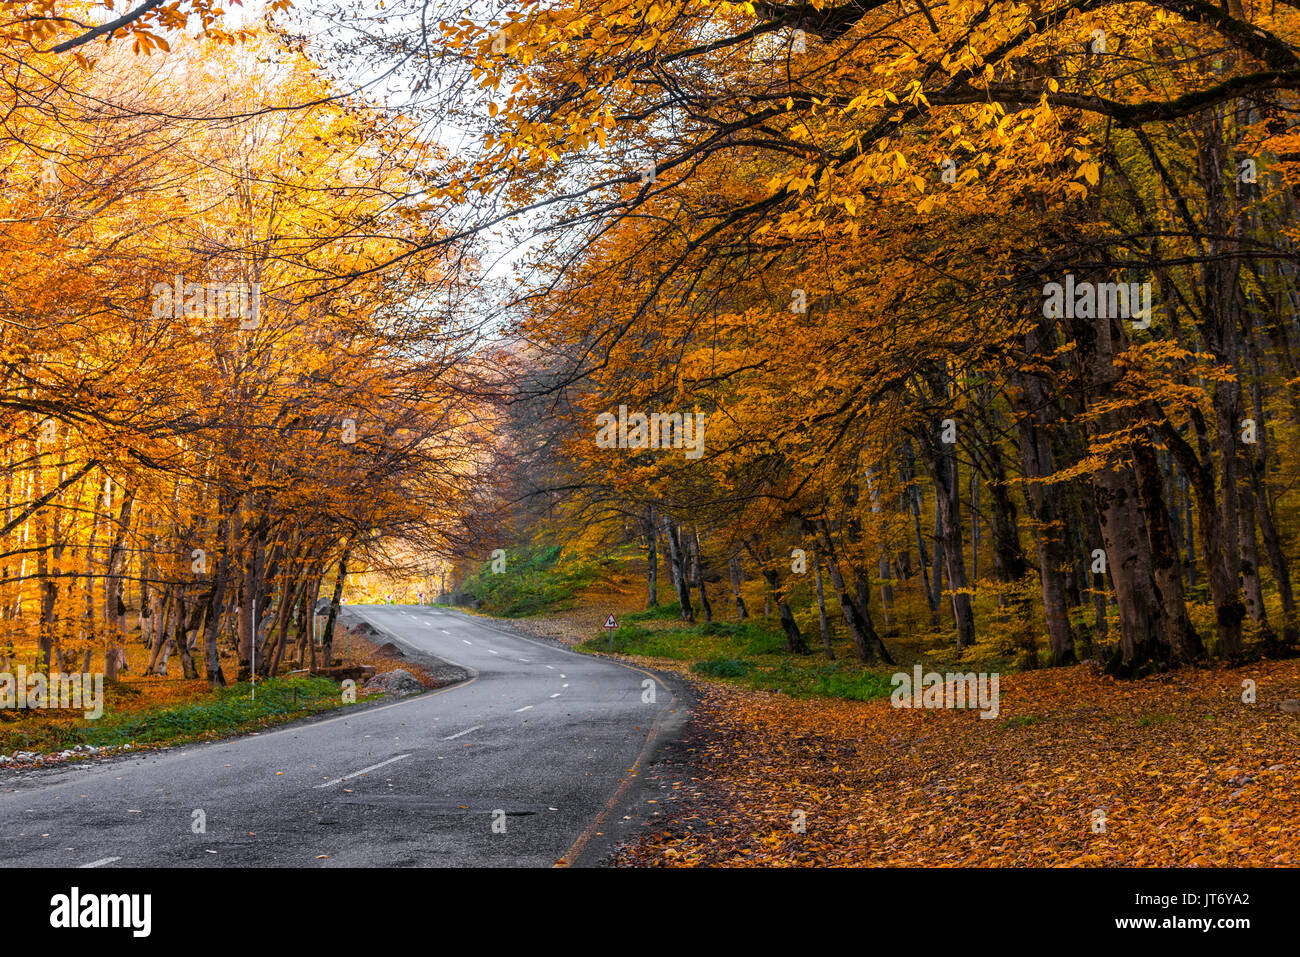 Autumn scene with road in forest Stock Photo